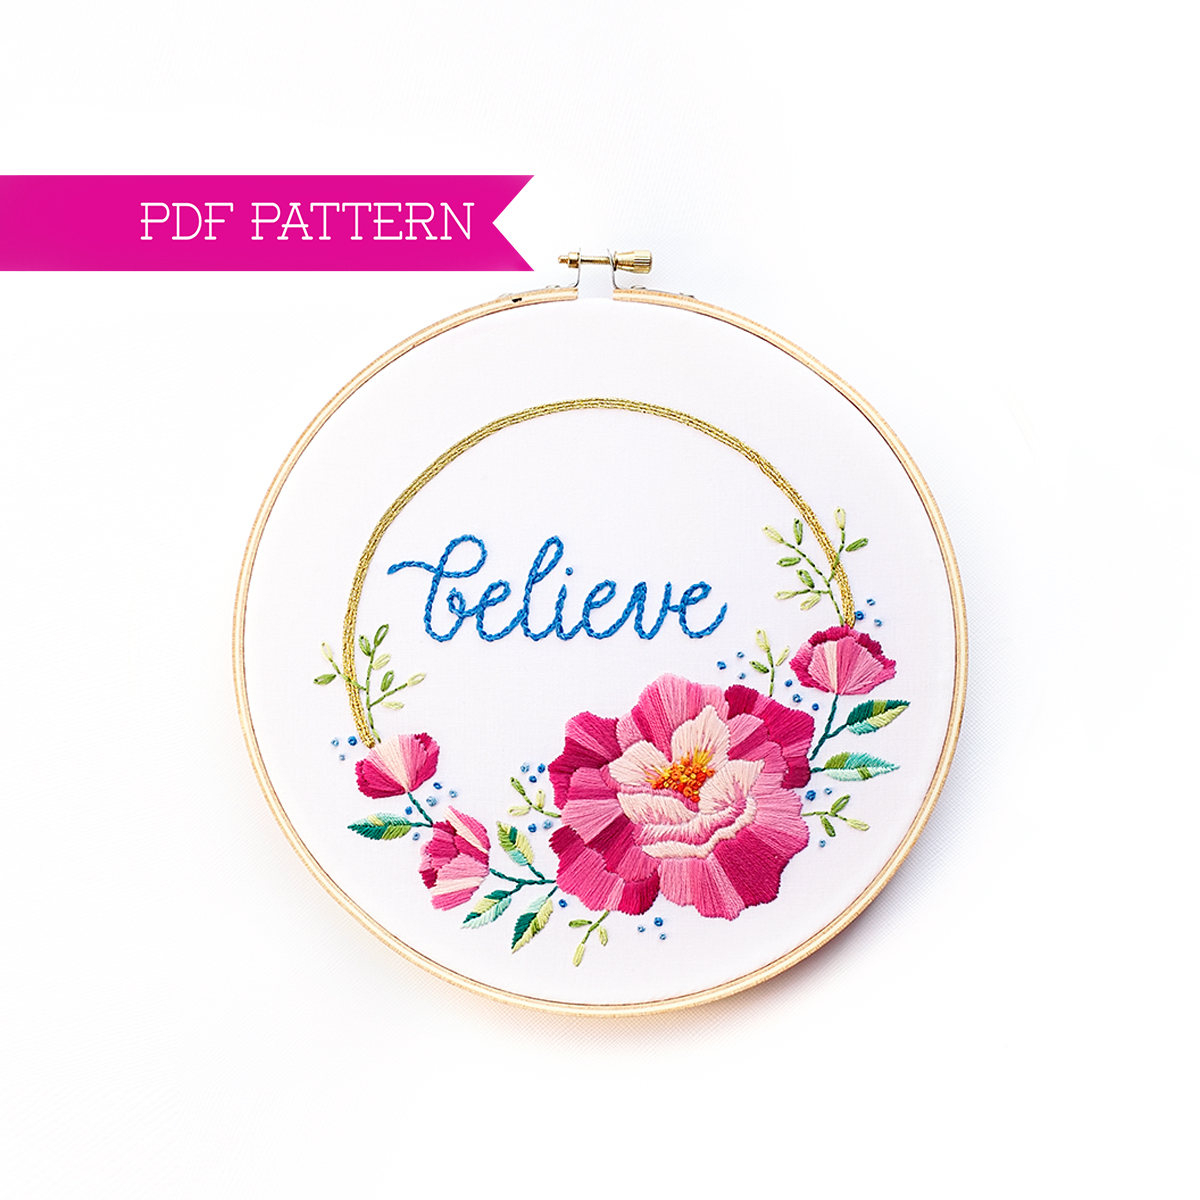 Flower Embroidery Pattern Flower Embroidery Pattern Floral Embroidery Design Flower Pattern One Word Pdf Pattern Hoop Art Hand Embroidery Floral Letter